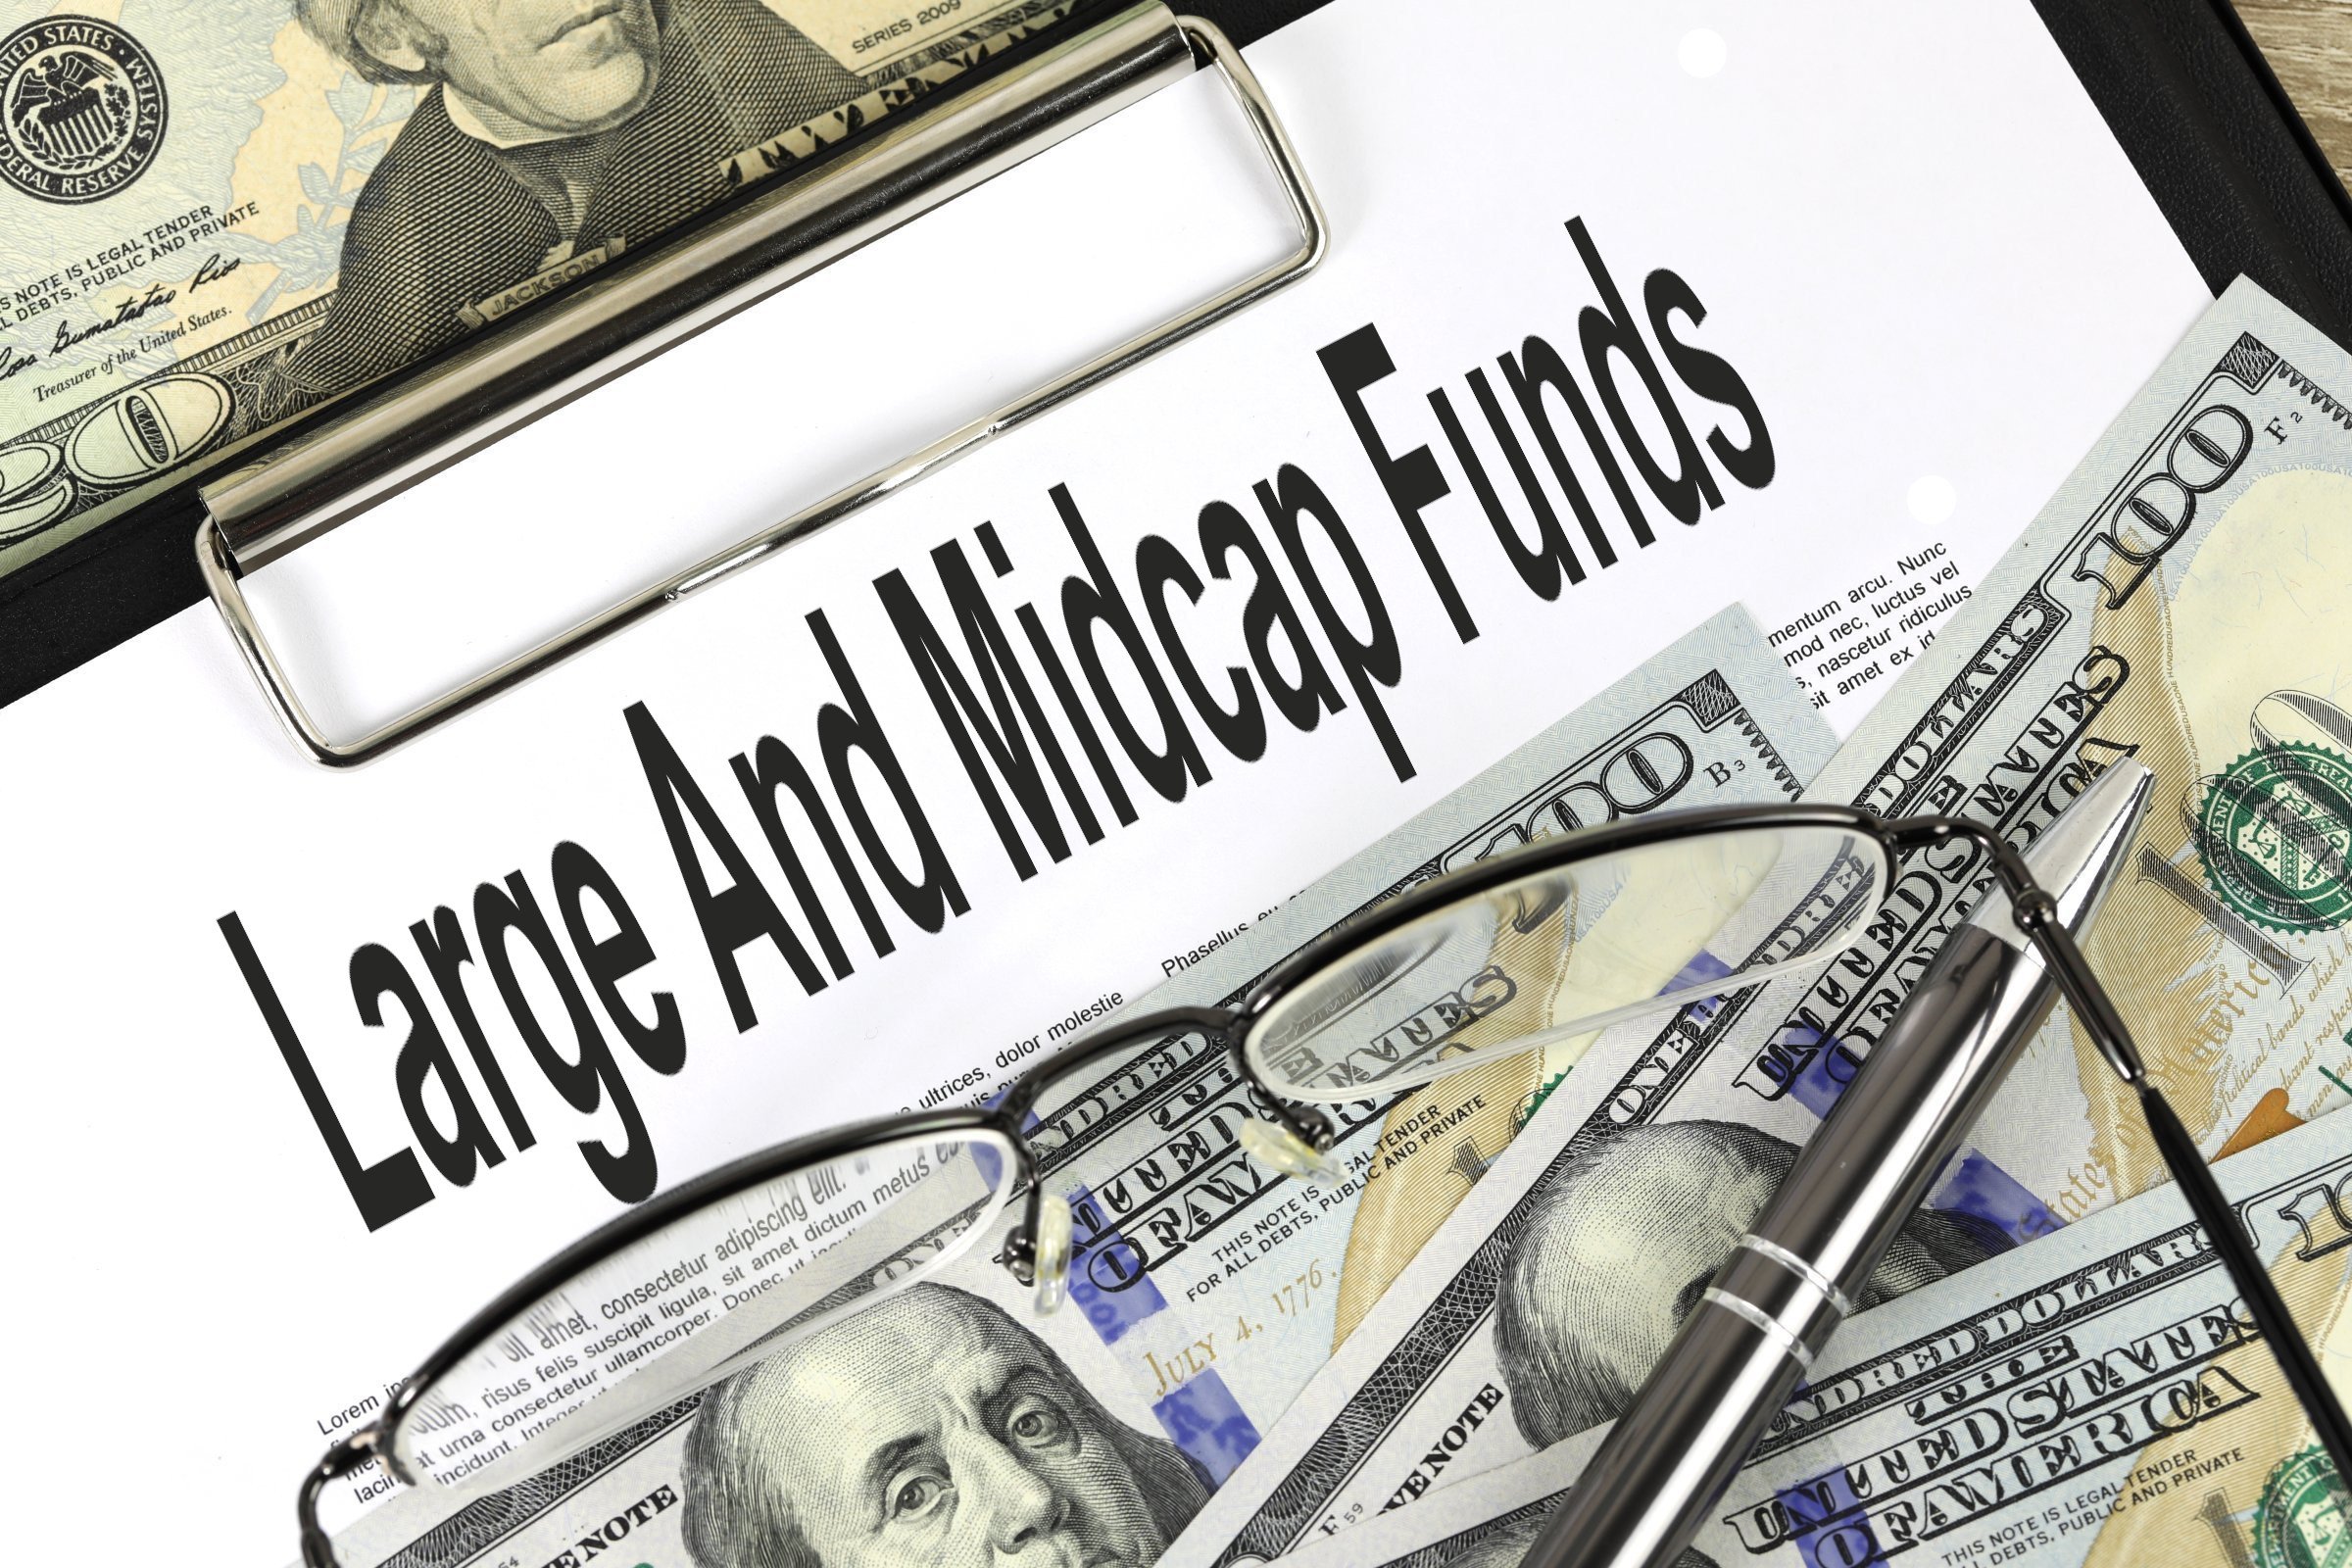 large and midcap funds